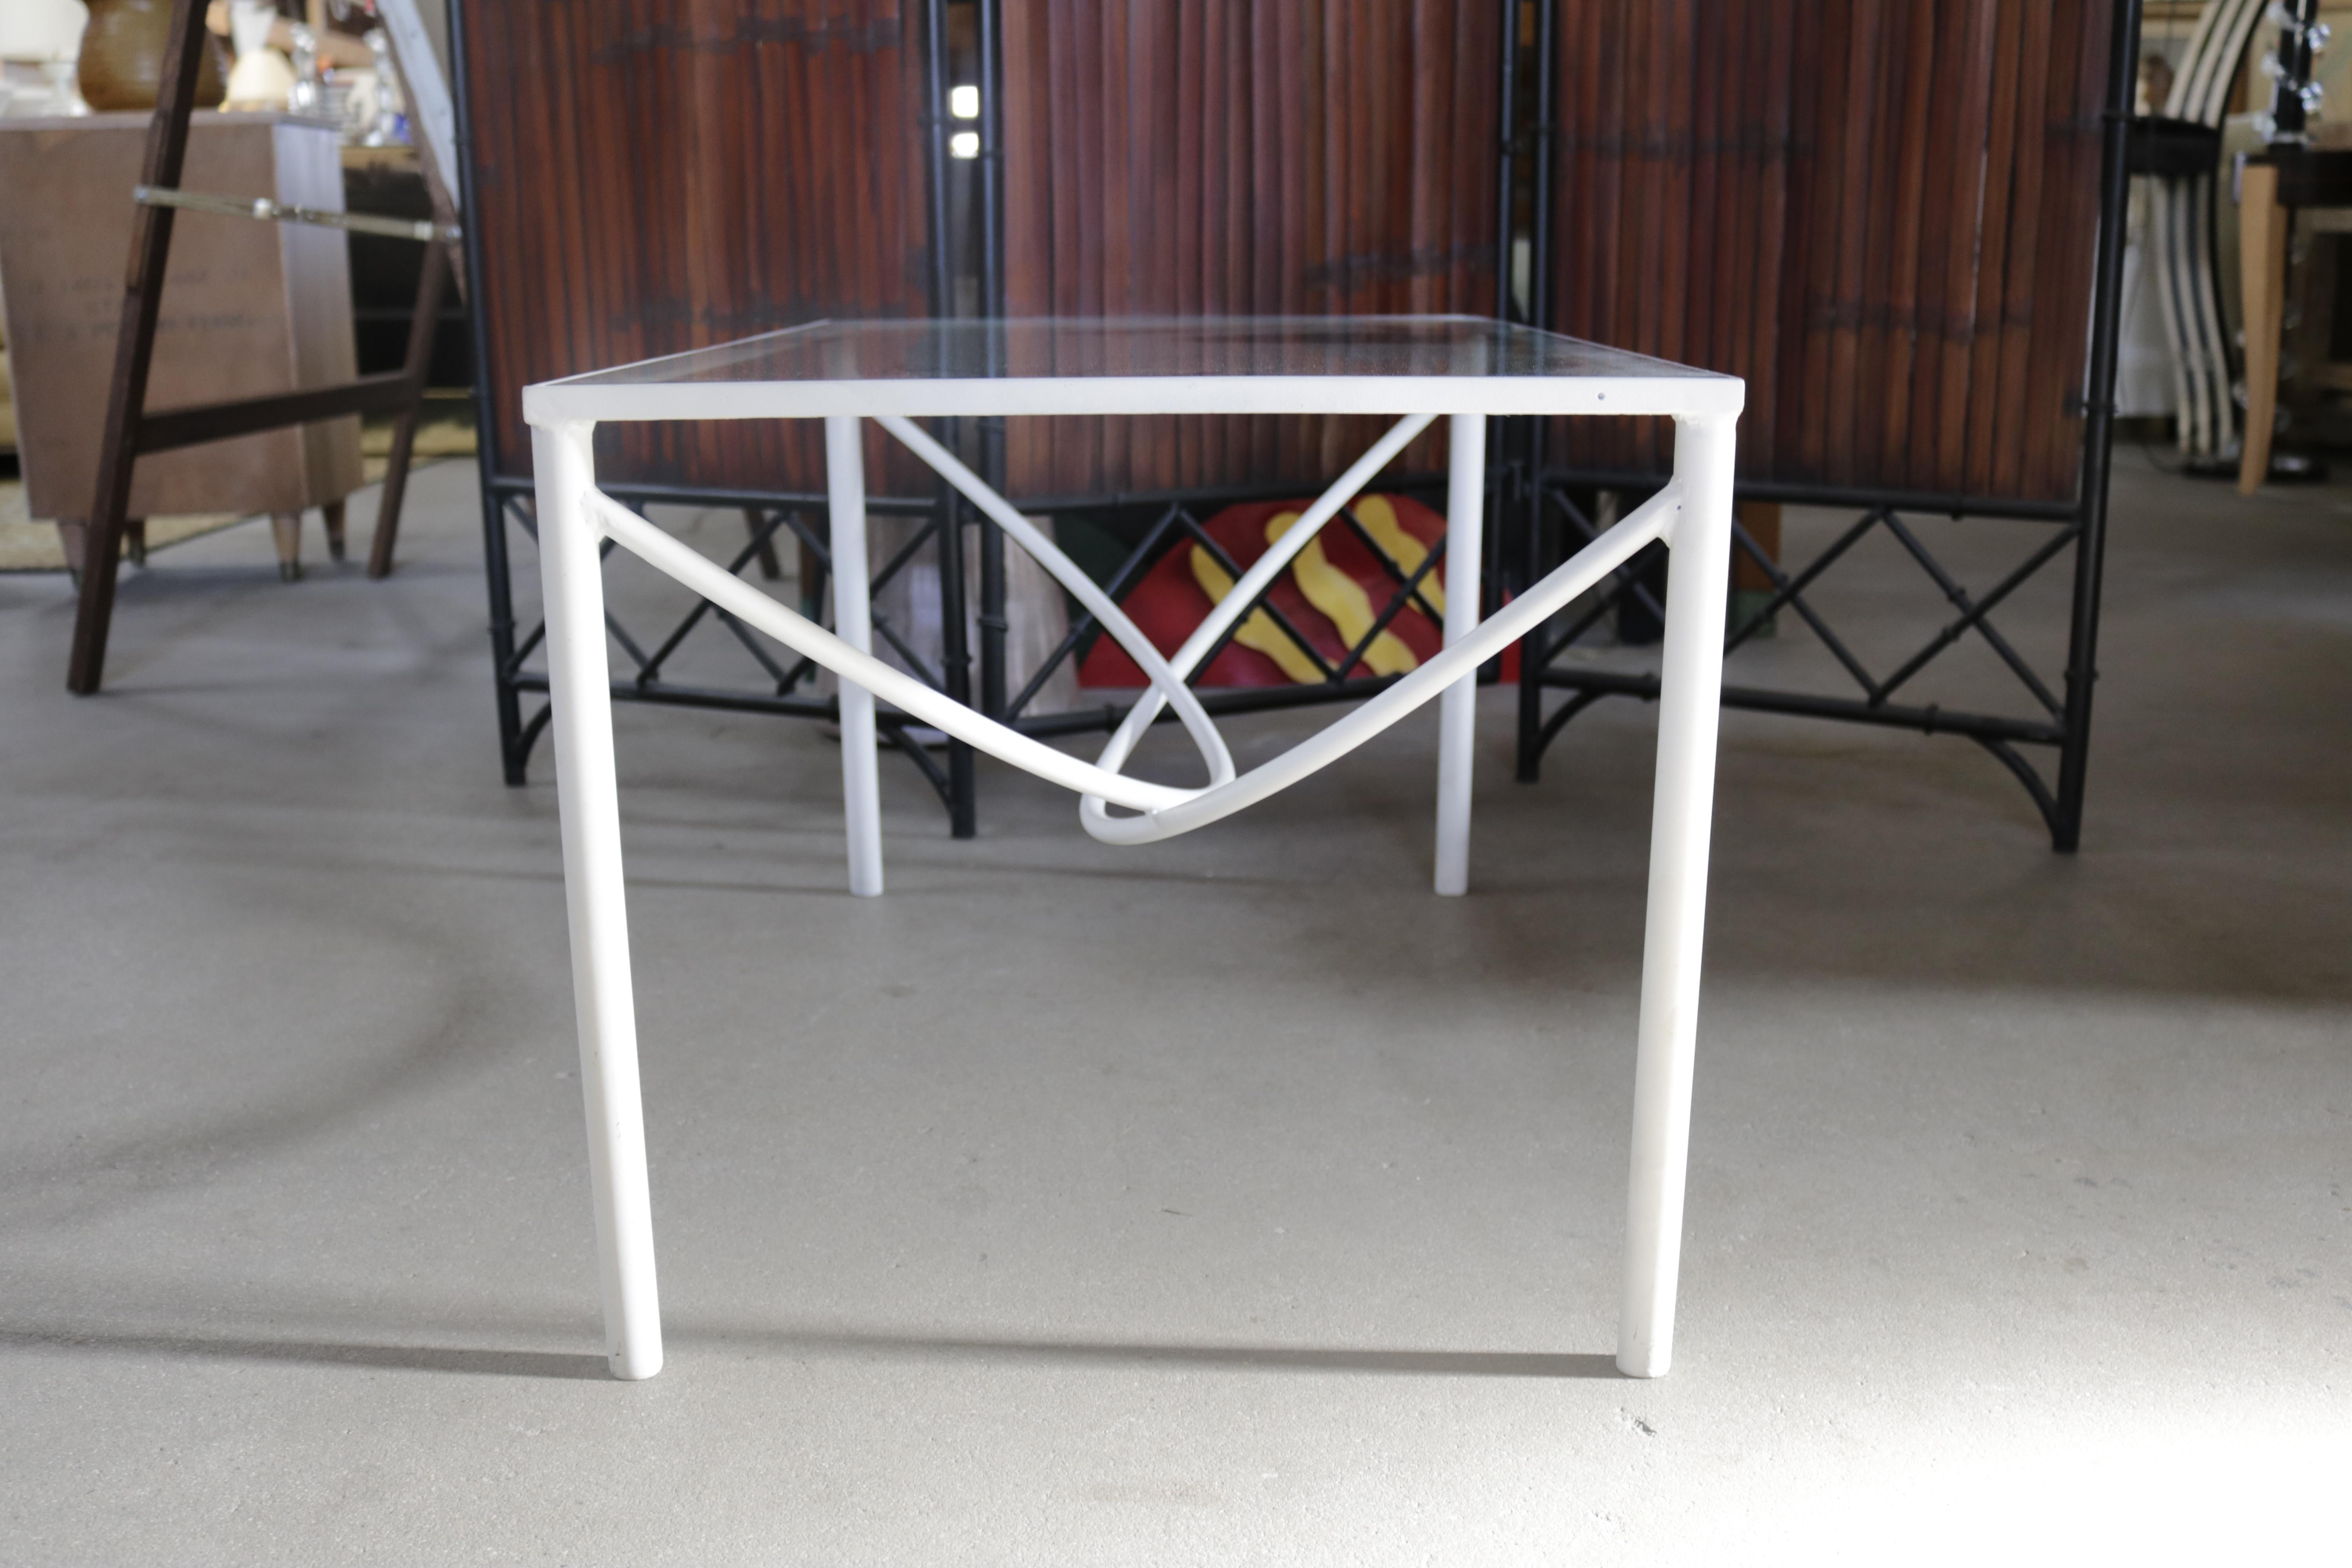 Elegant, bent steel coffee table in white lacquer with an inset glass surface. The table's central support is composed of two half circles creating an eye-catching, architectural design.